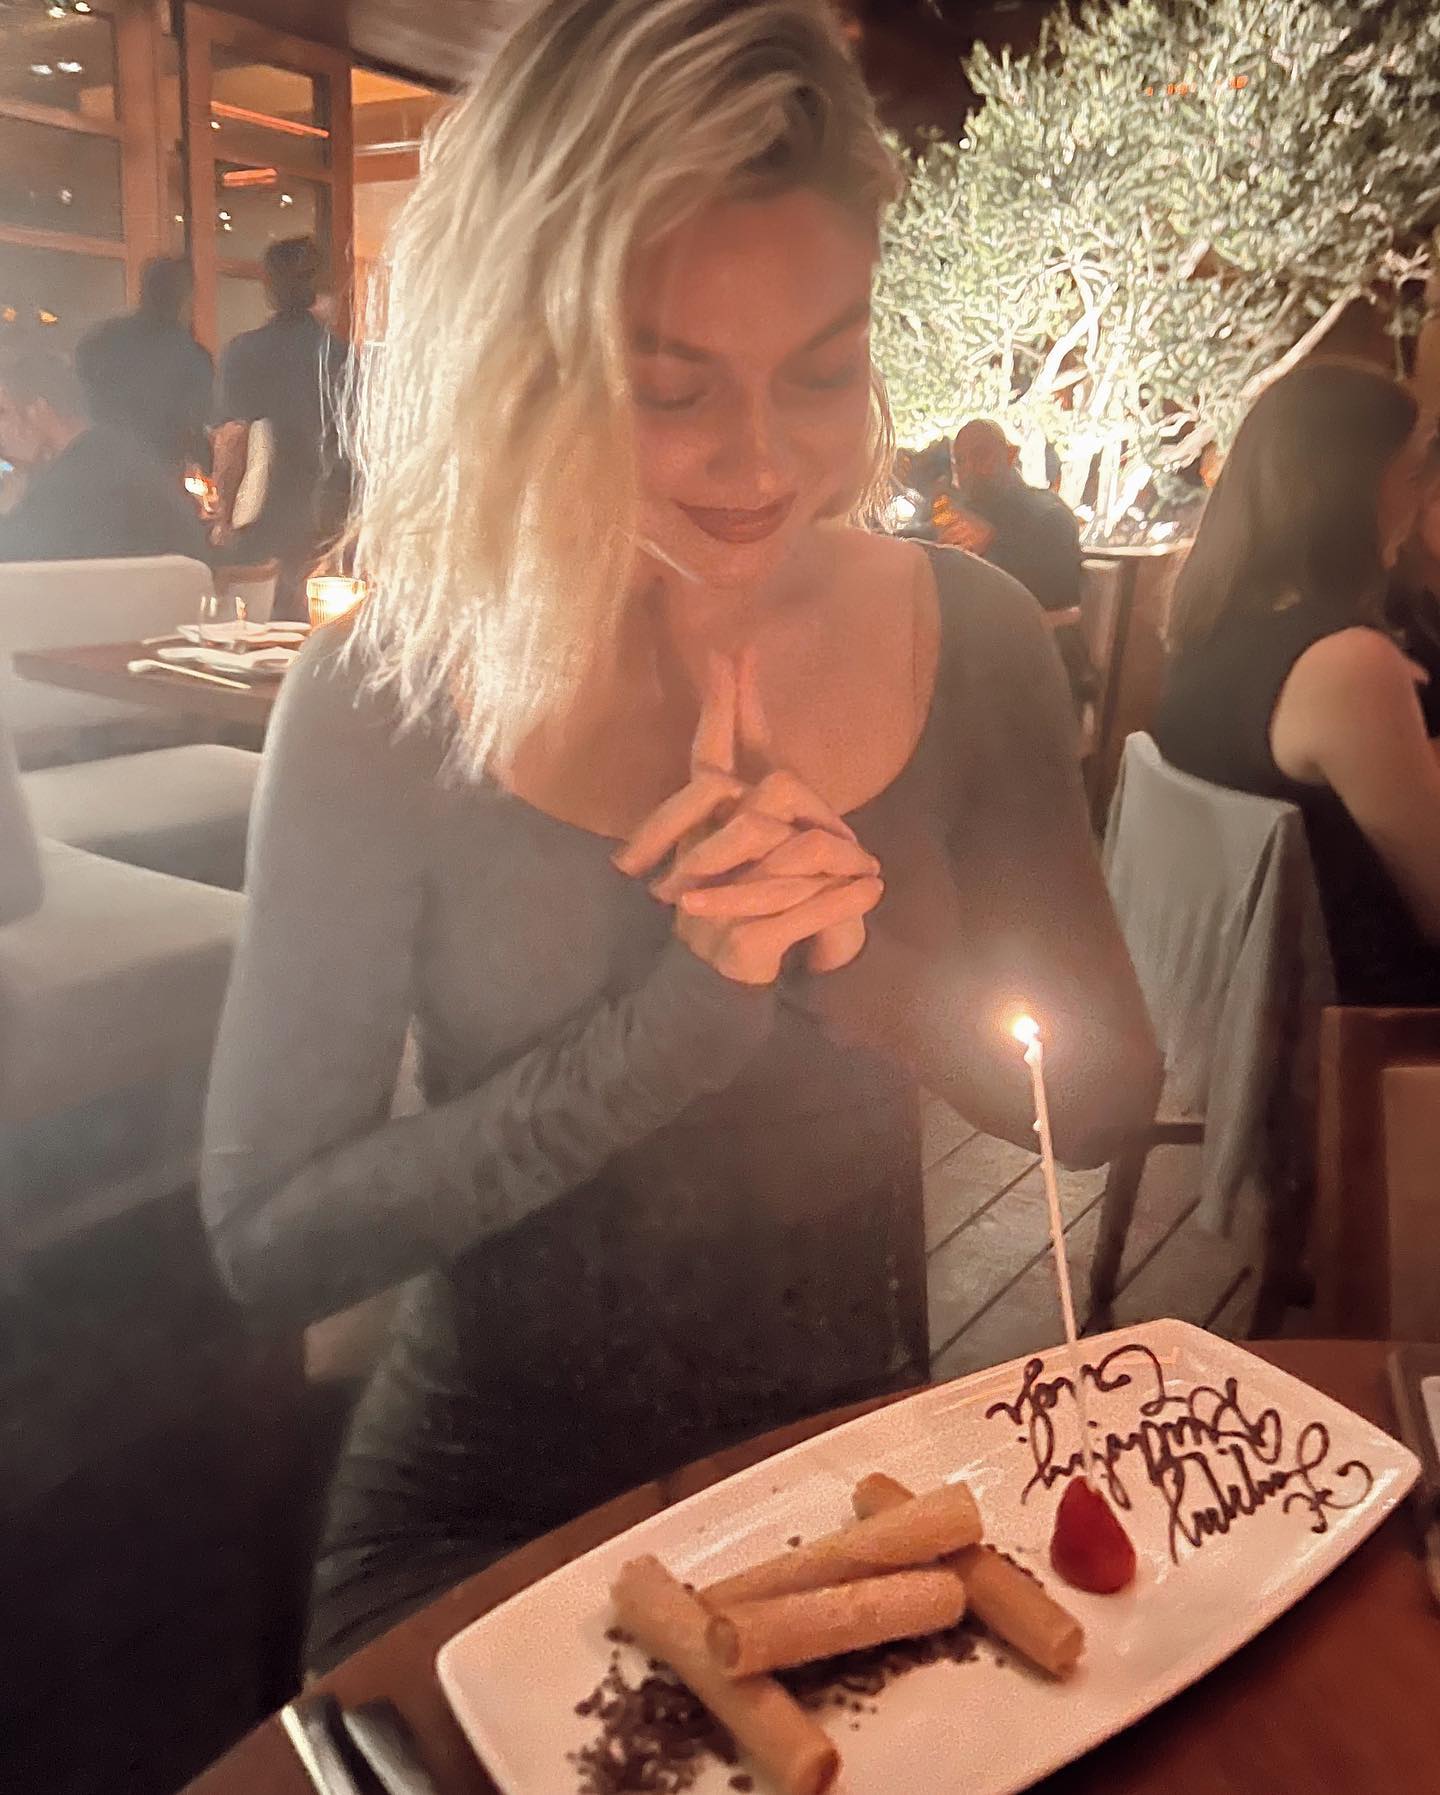 The last photo captured Gigi wearing a skintight outfit at her birthday dinner